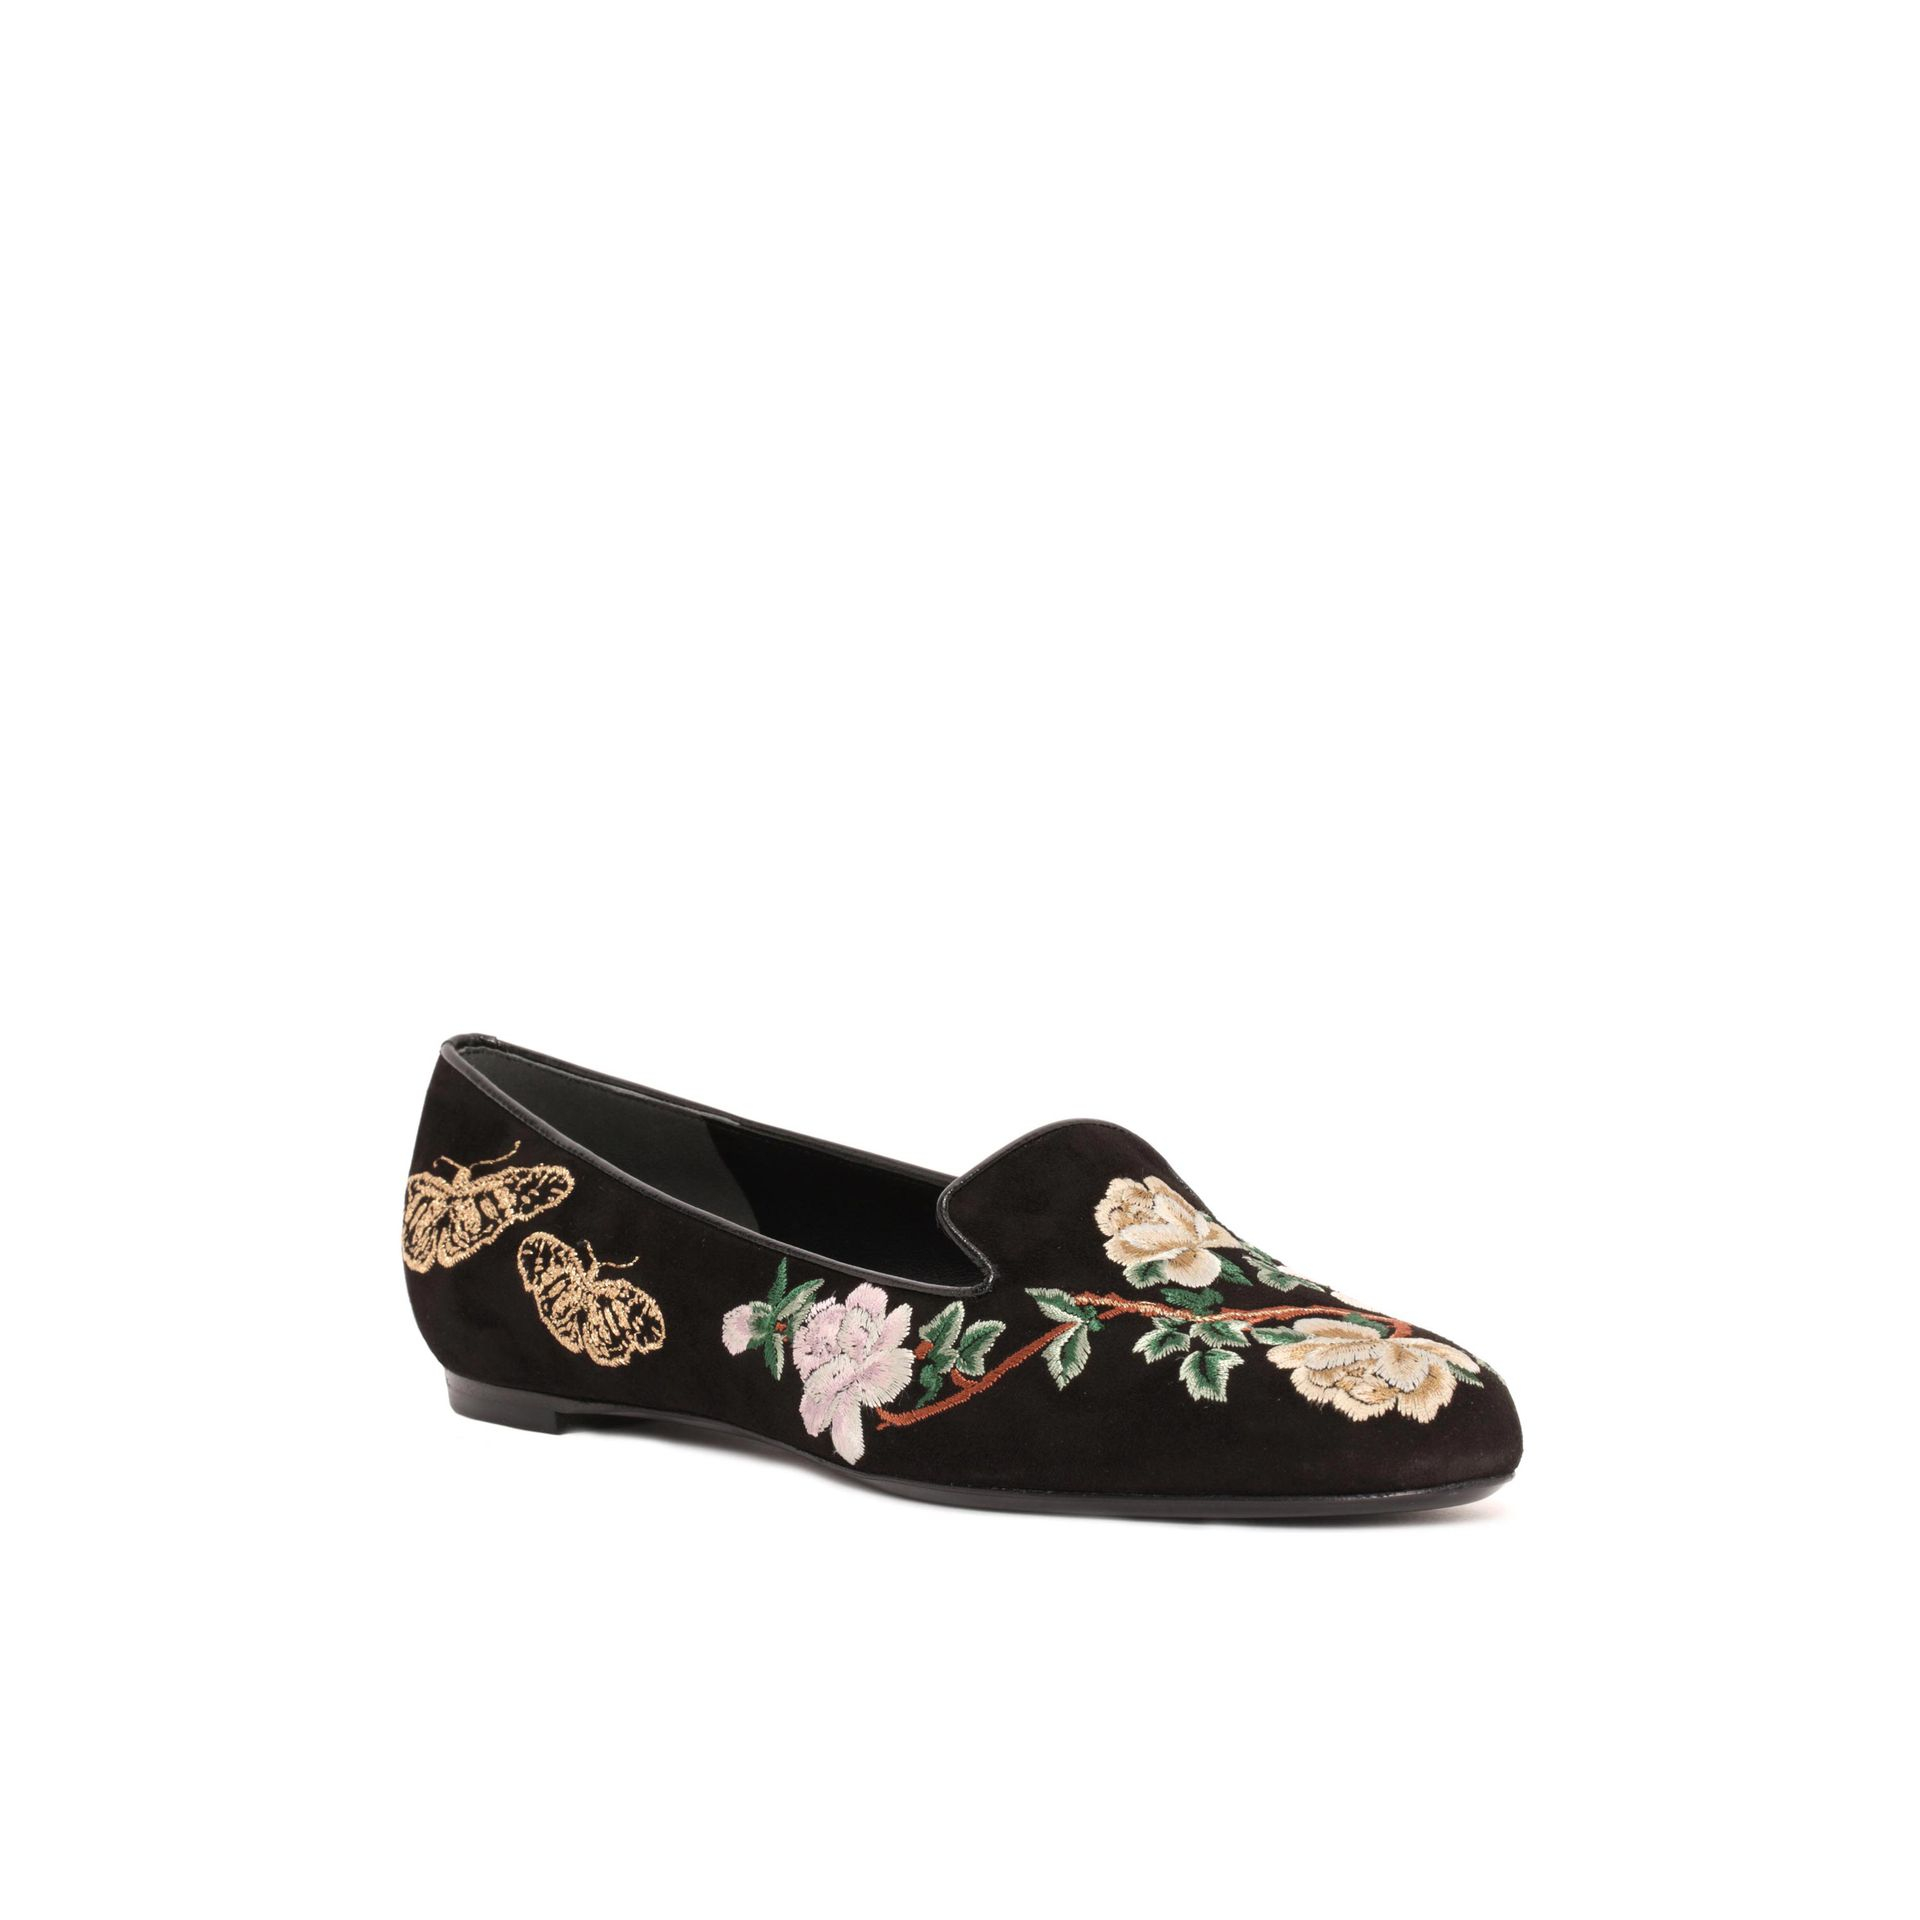 Lyst - Alexander mcqueen Floral Butterfly Embroidered Slipper in Black ...